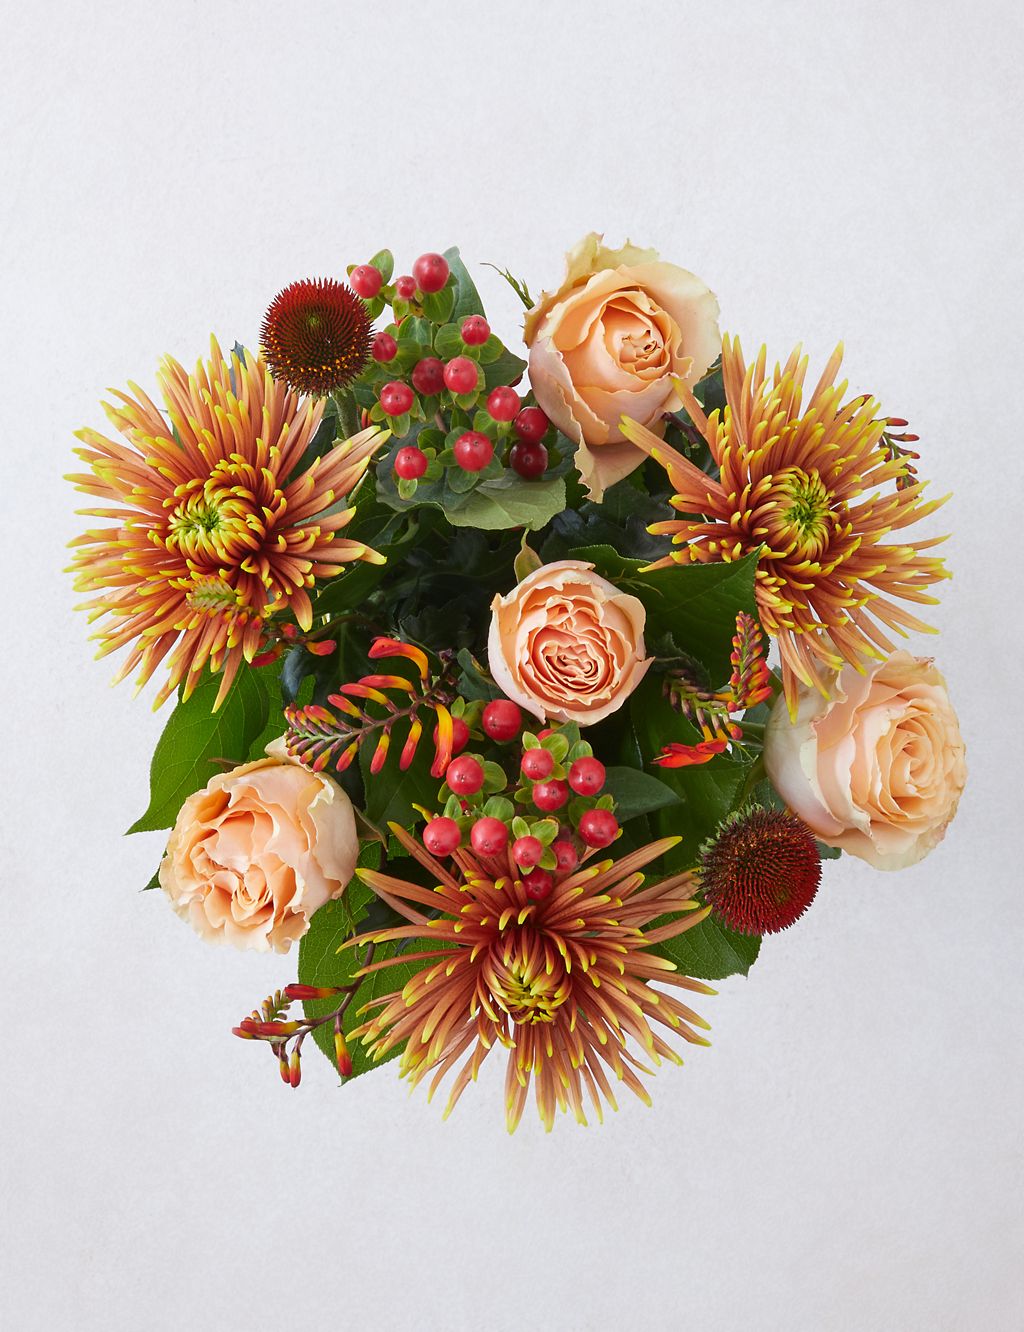 Autumn Amber Bloom Bouquet 1 of 4